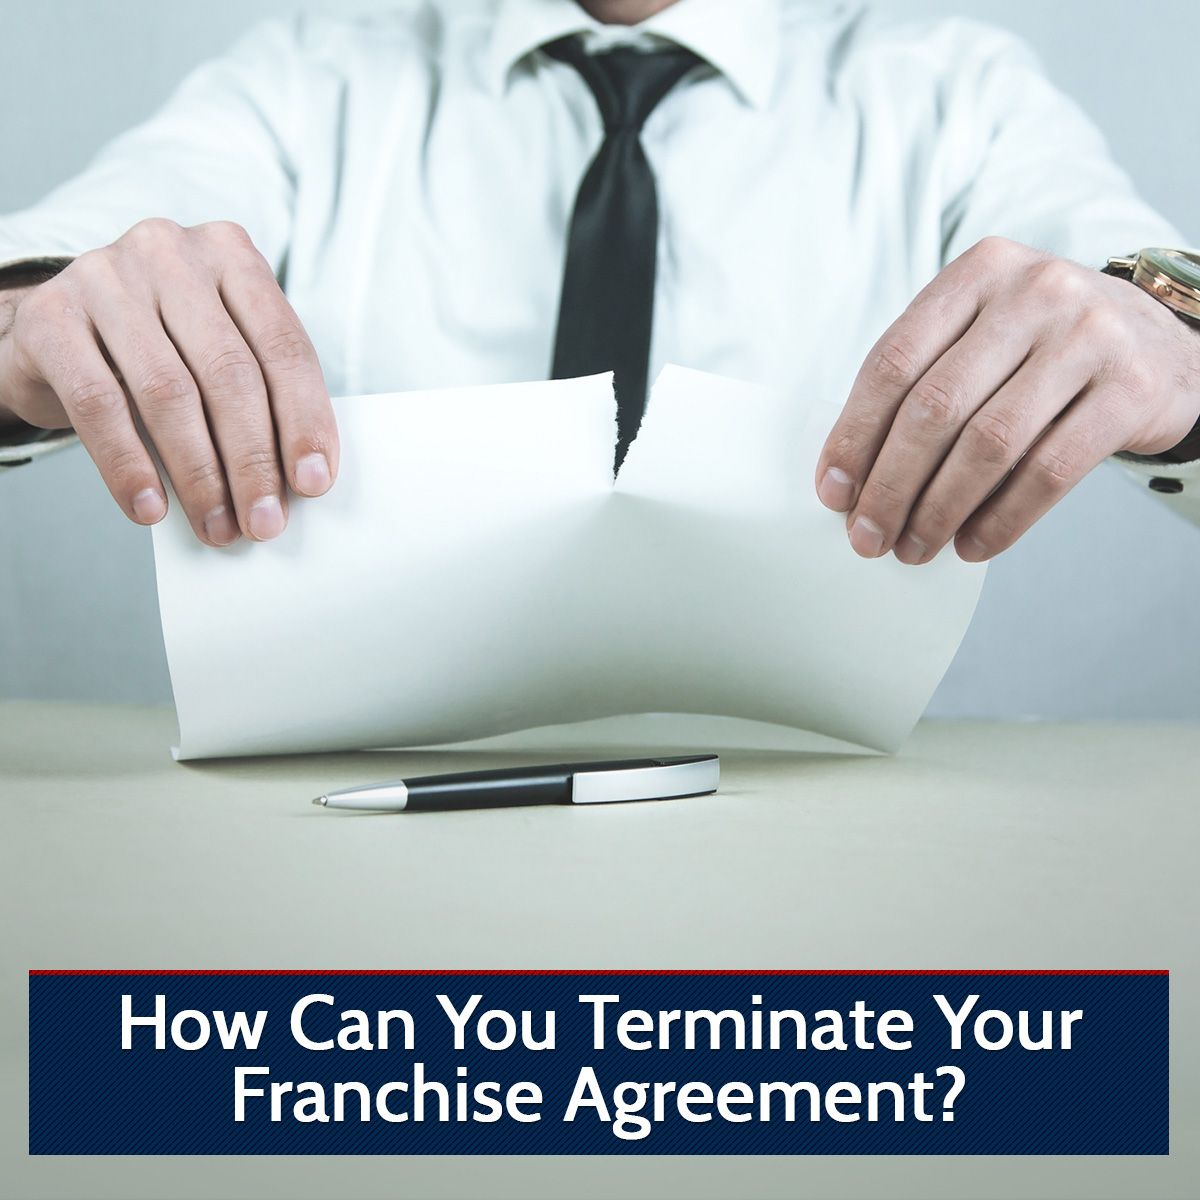 How Can You Terminate Your Franchise Agreement?